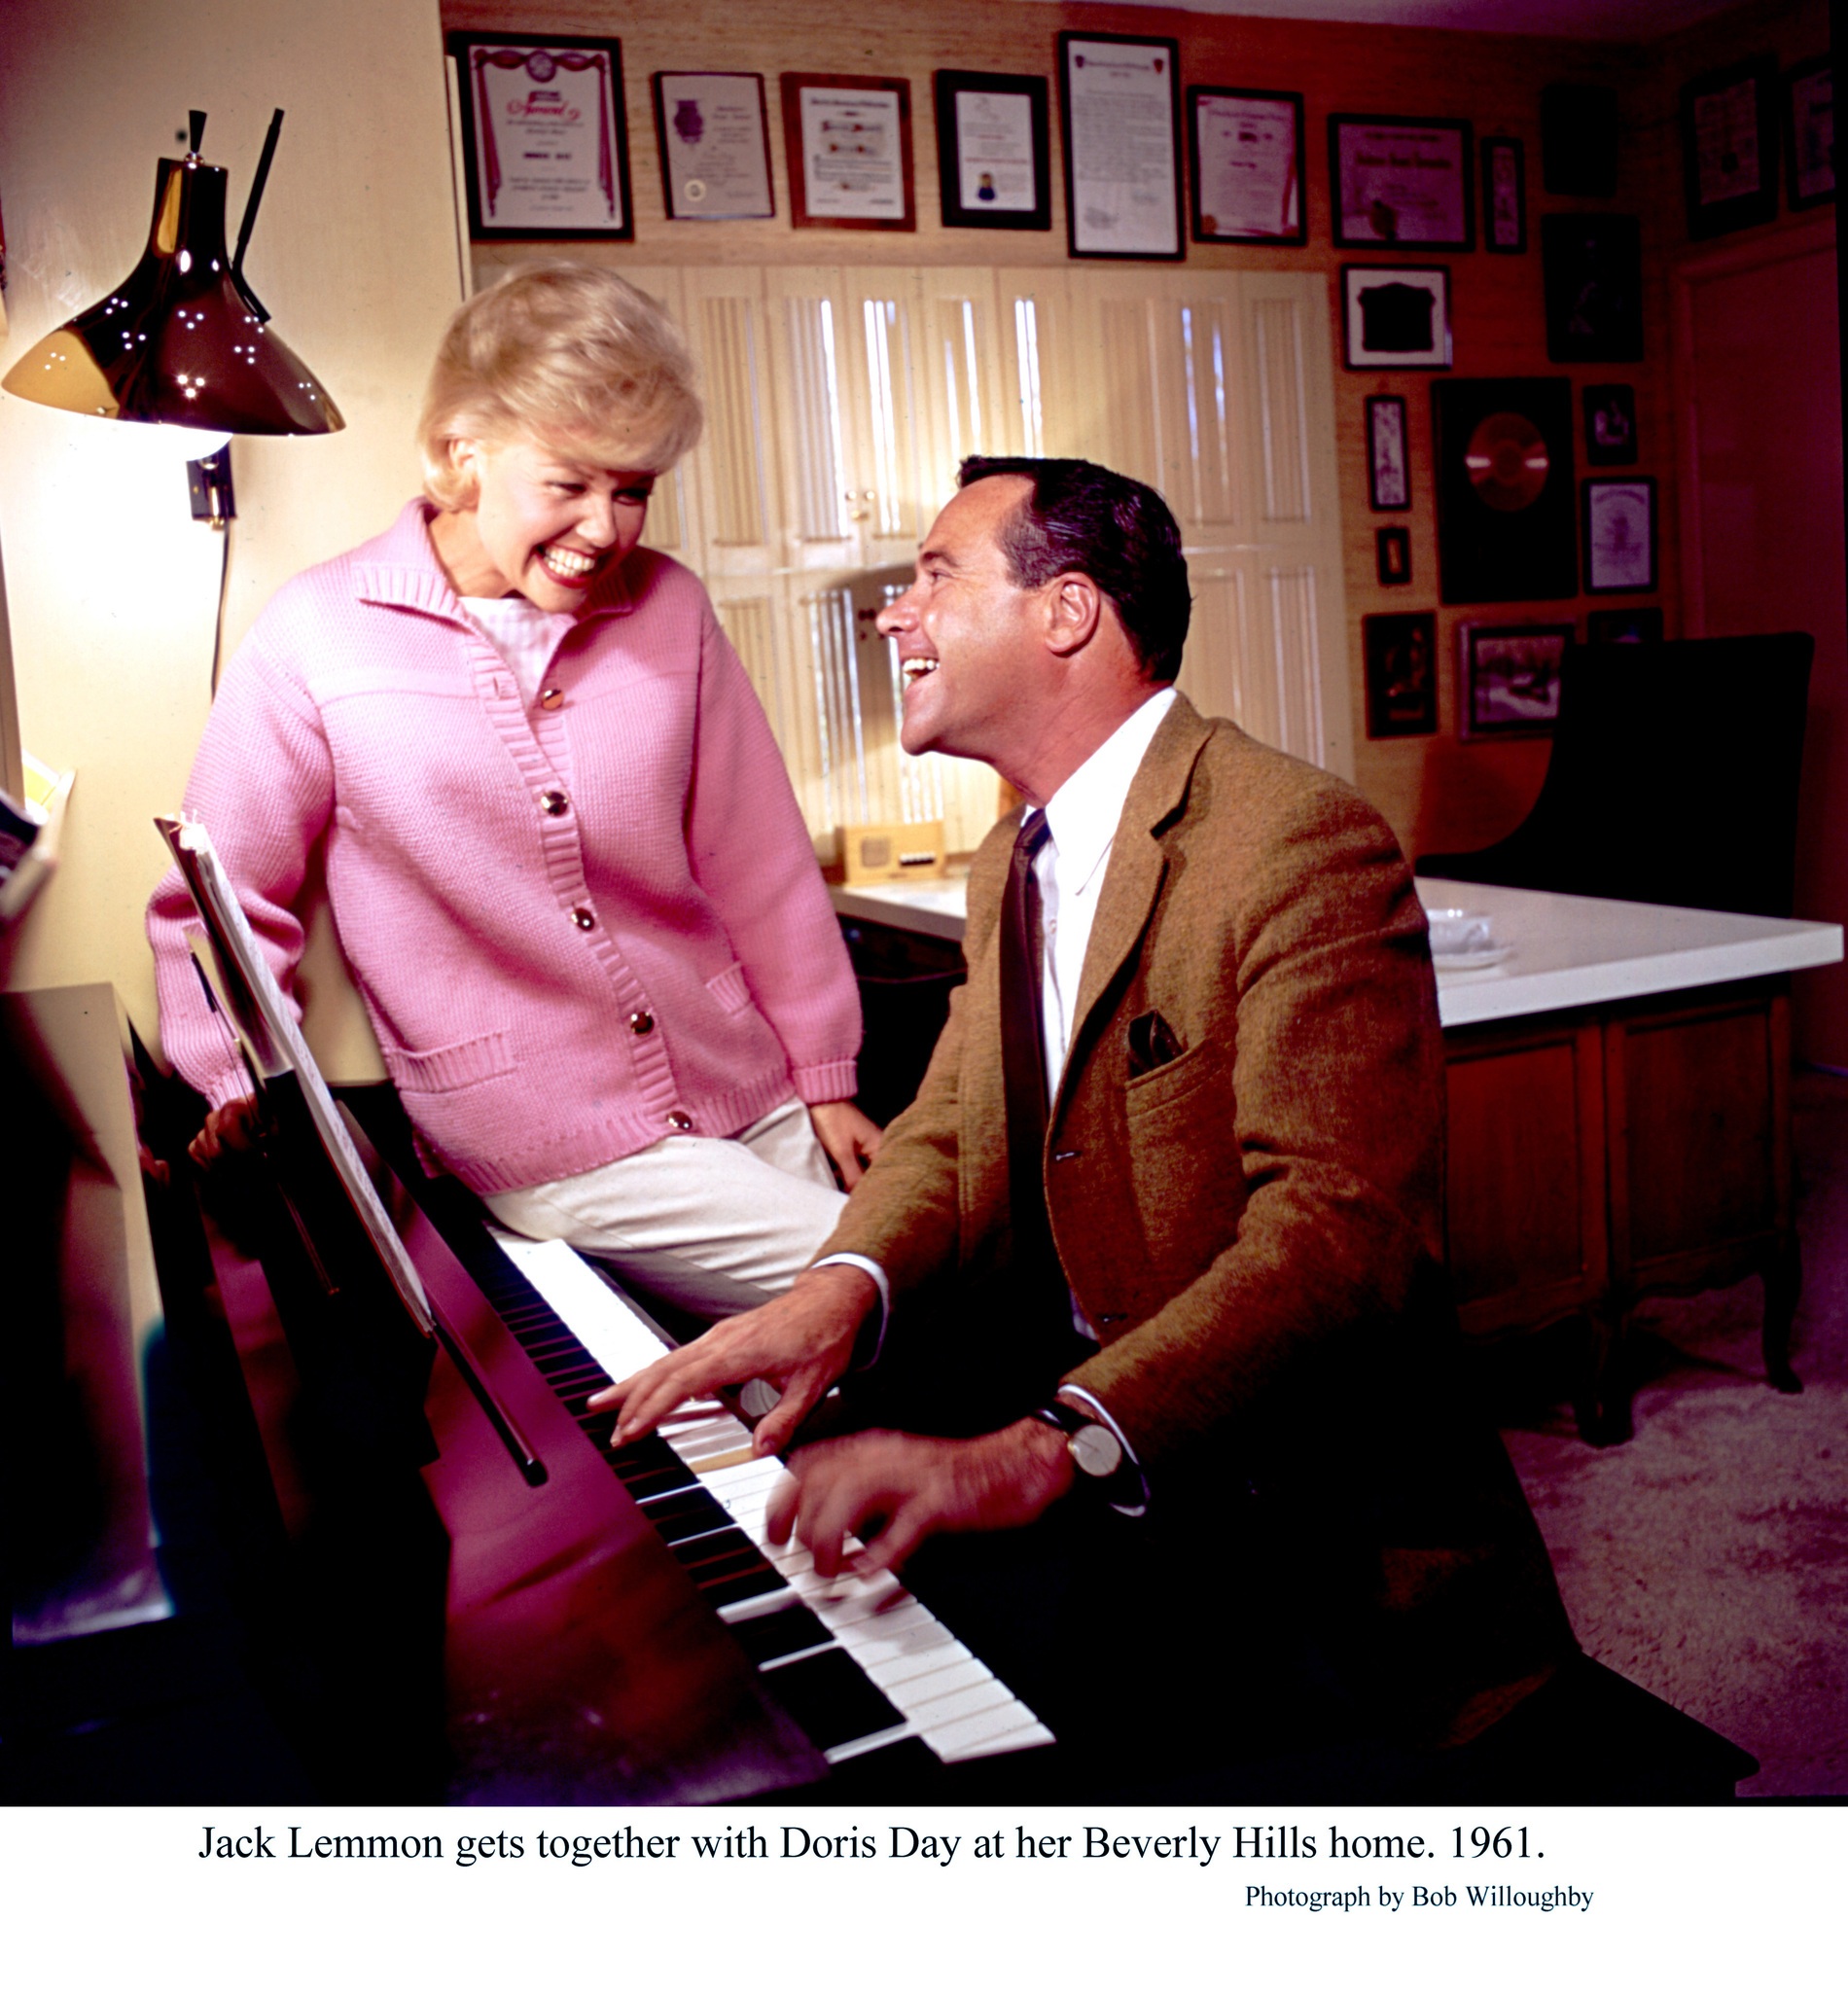 Jack Lemmon with Doris Day at her Beverly Hills home, 1961.